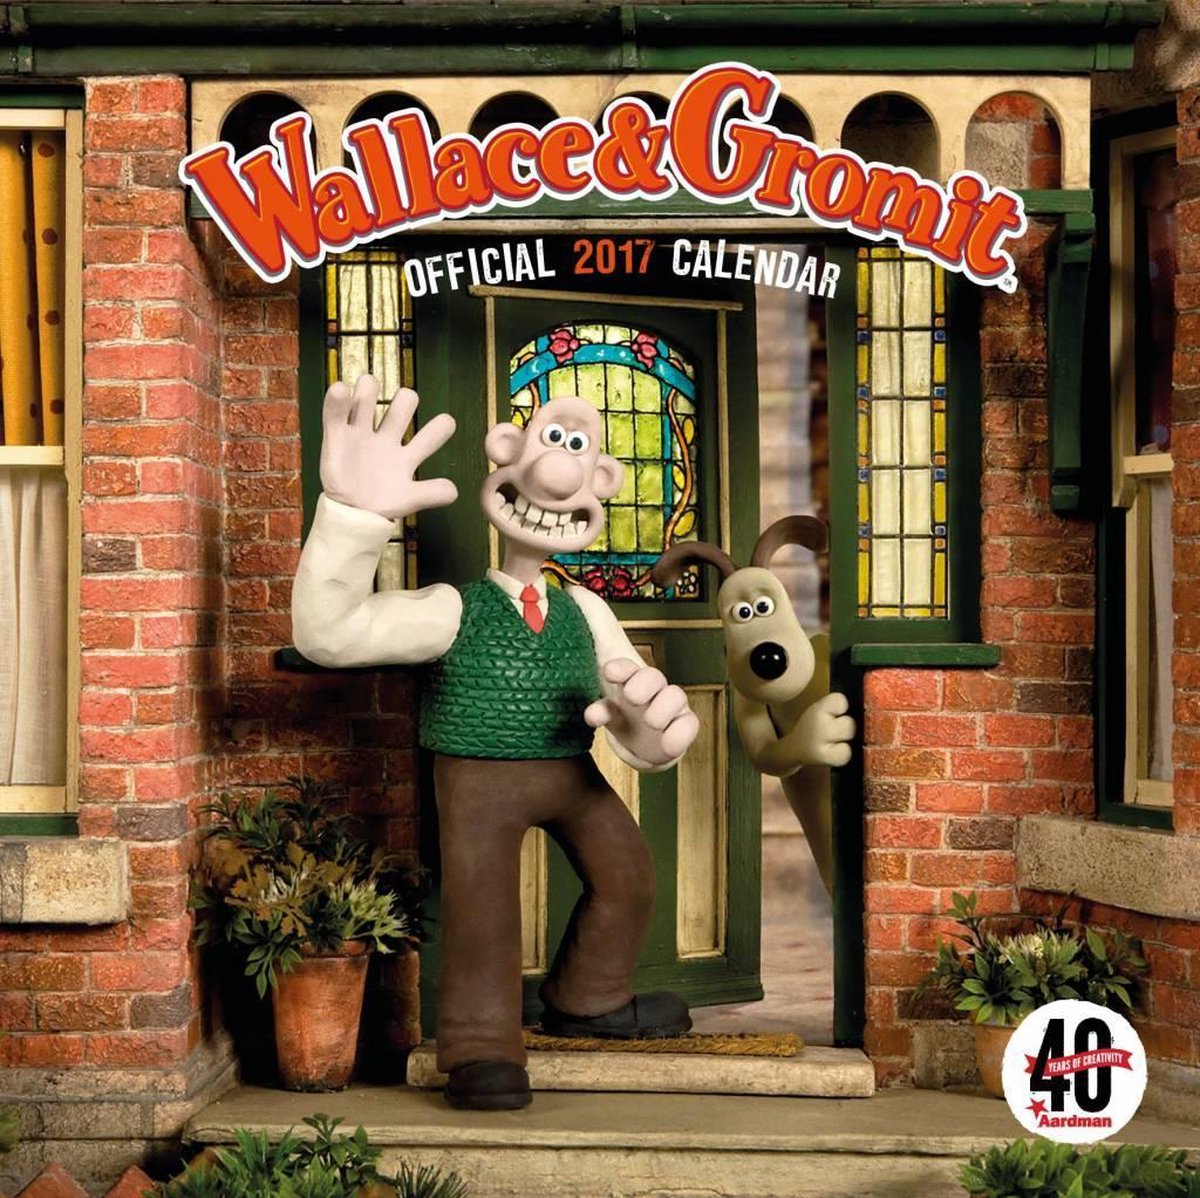 wallace-and-gromit-official-2017-square-calendar-40th-anniversary-aardman-bol